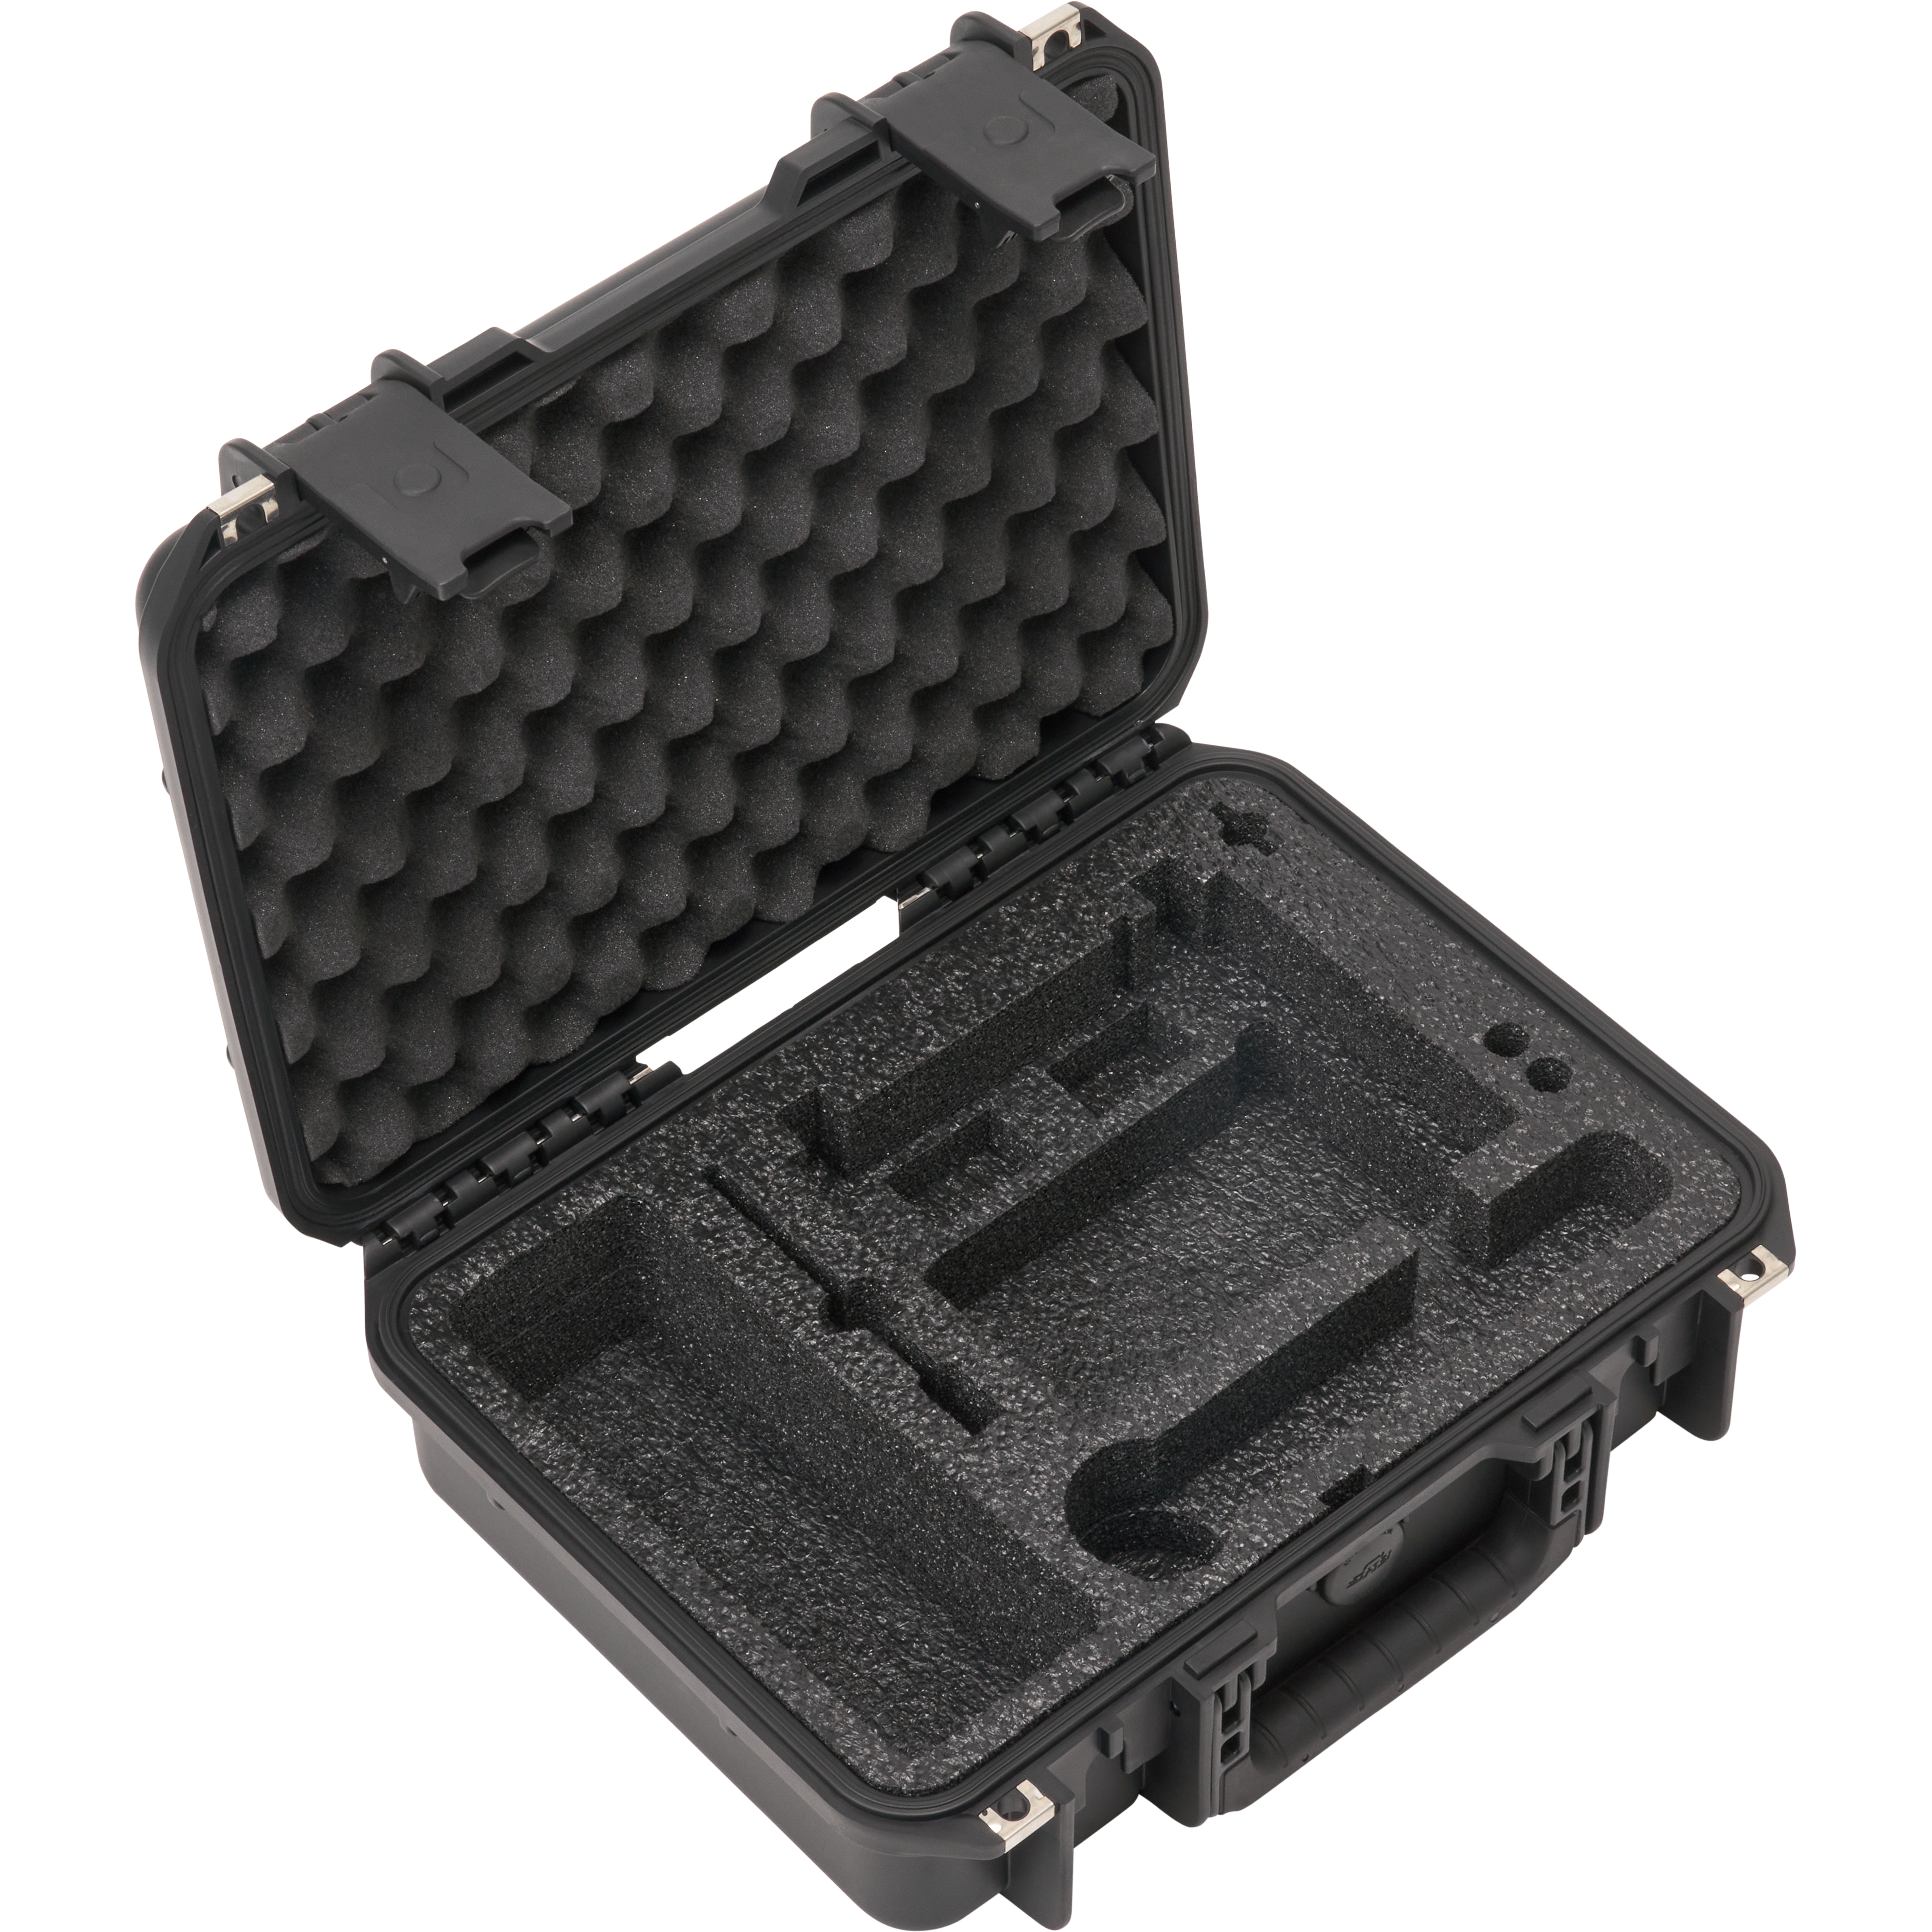 BYFP ipCase for Shure SLX-D Single Handheld System